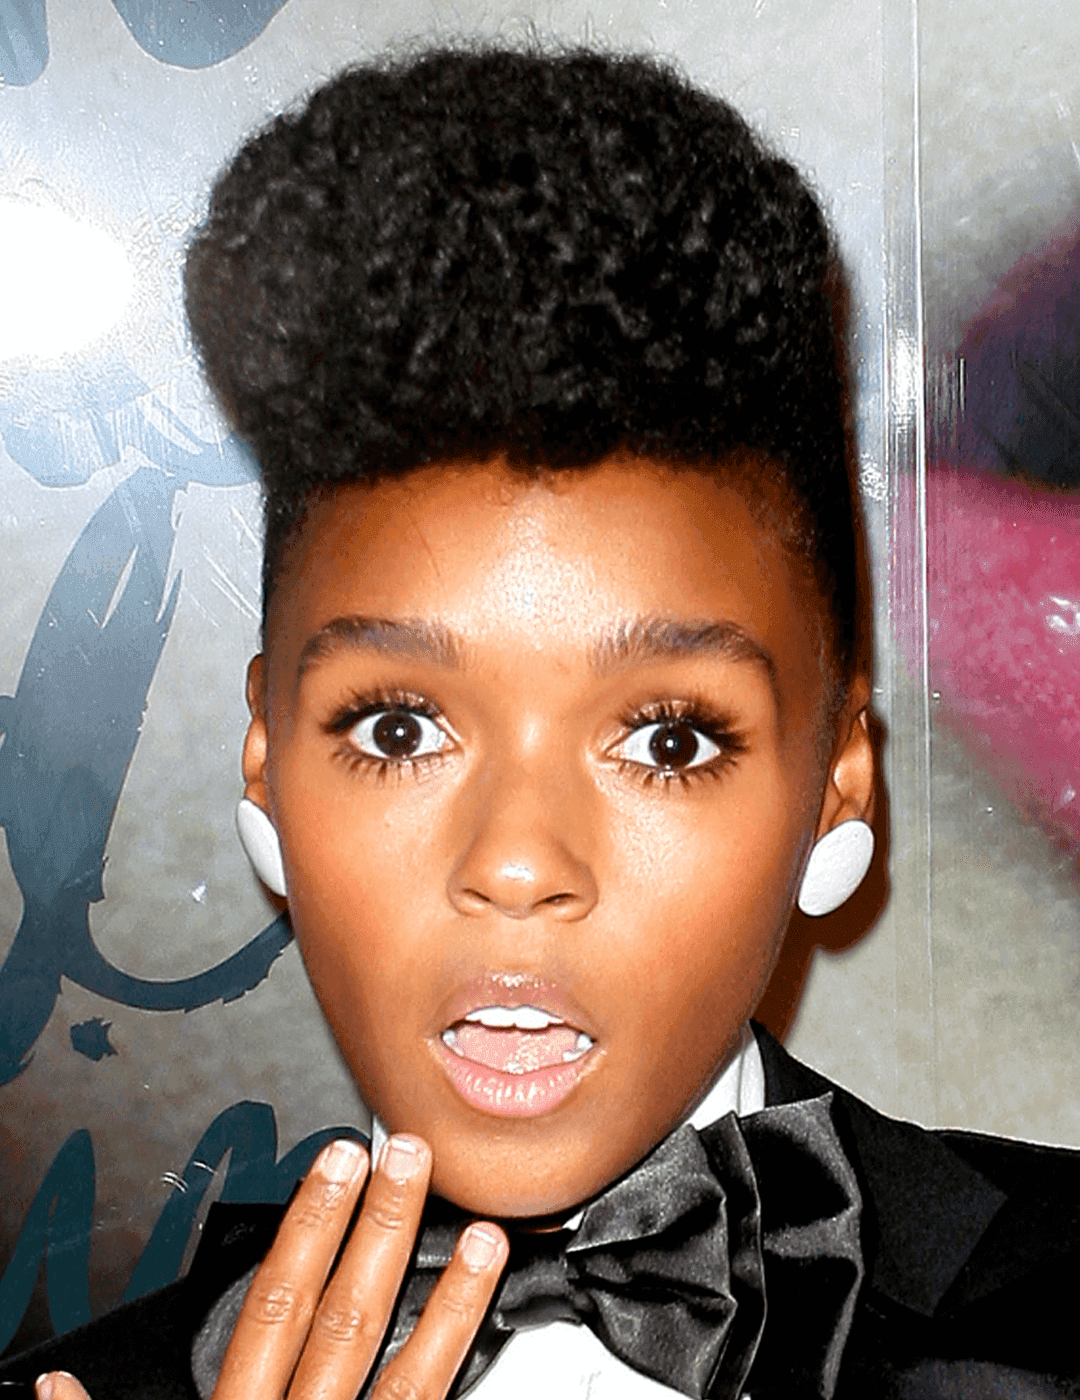 Janelle Monae in a quiff hairstyle, black suit and blow, and white stud earrings looking shocked